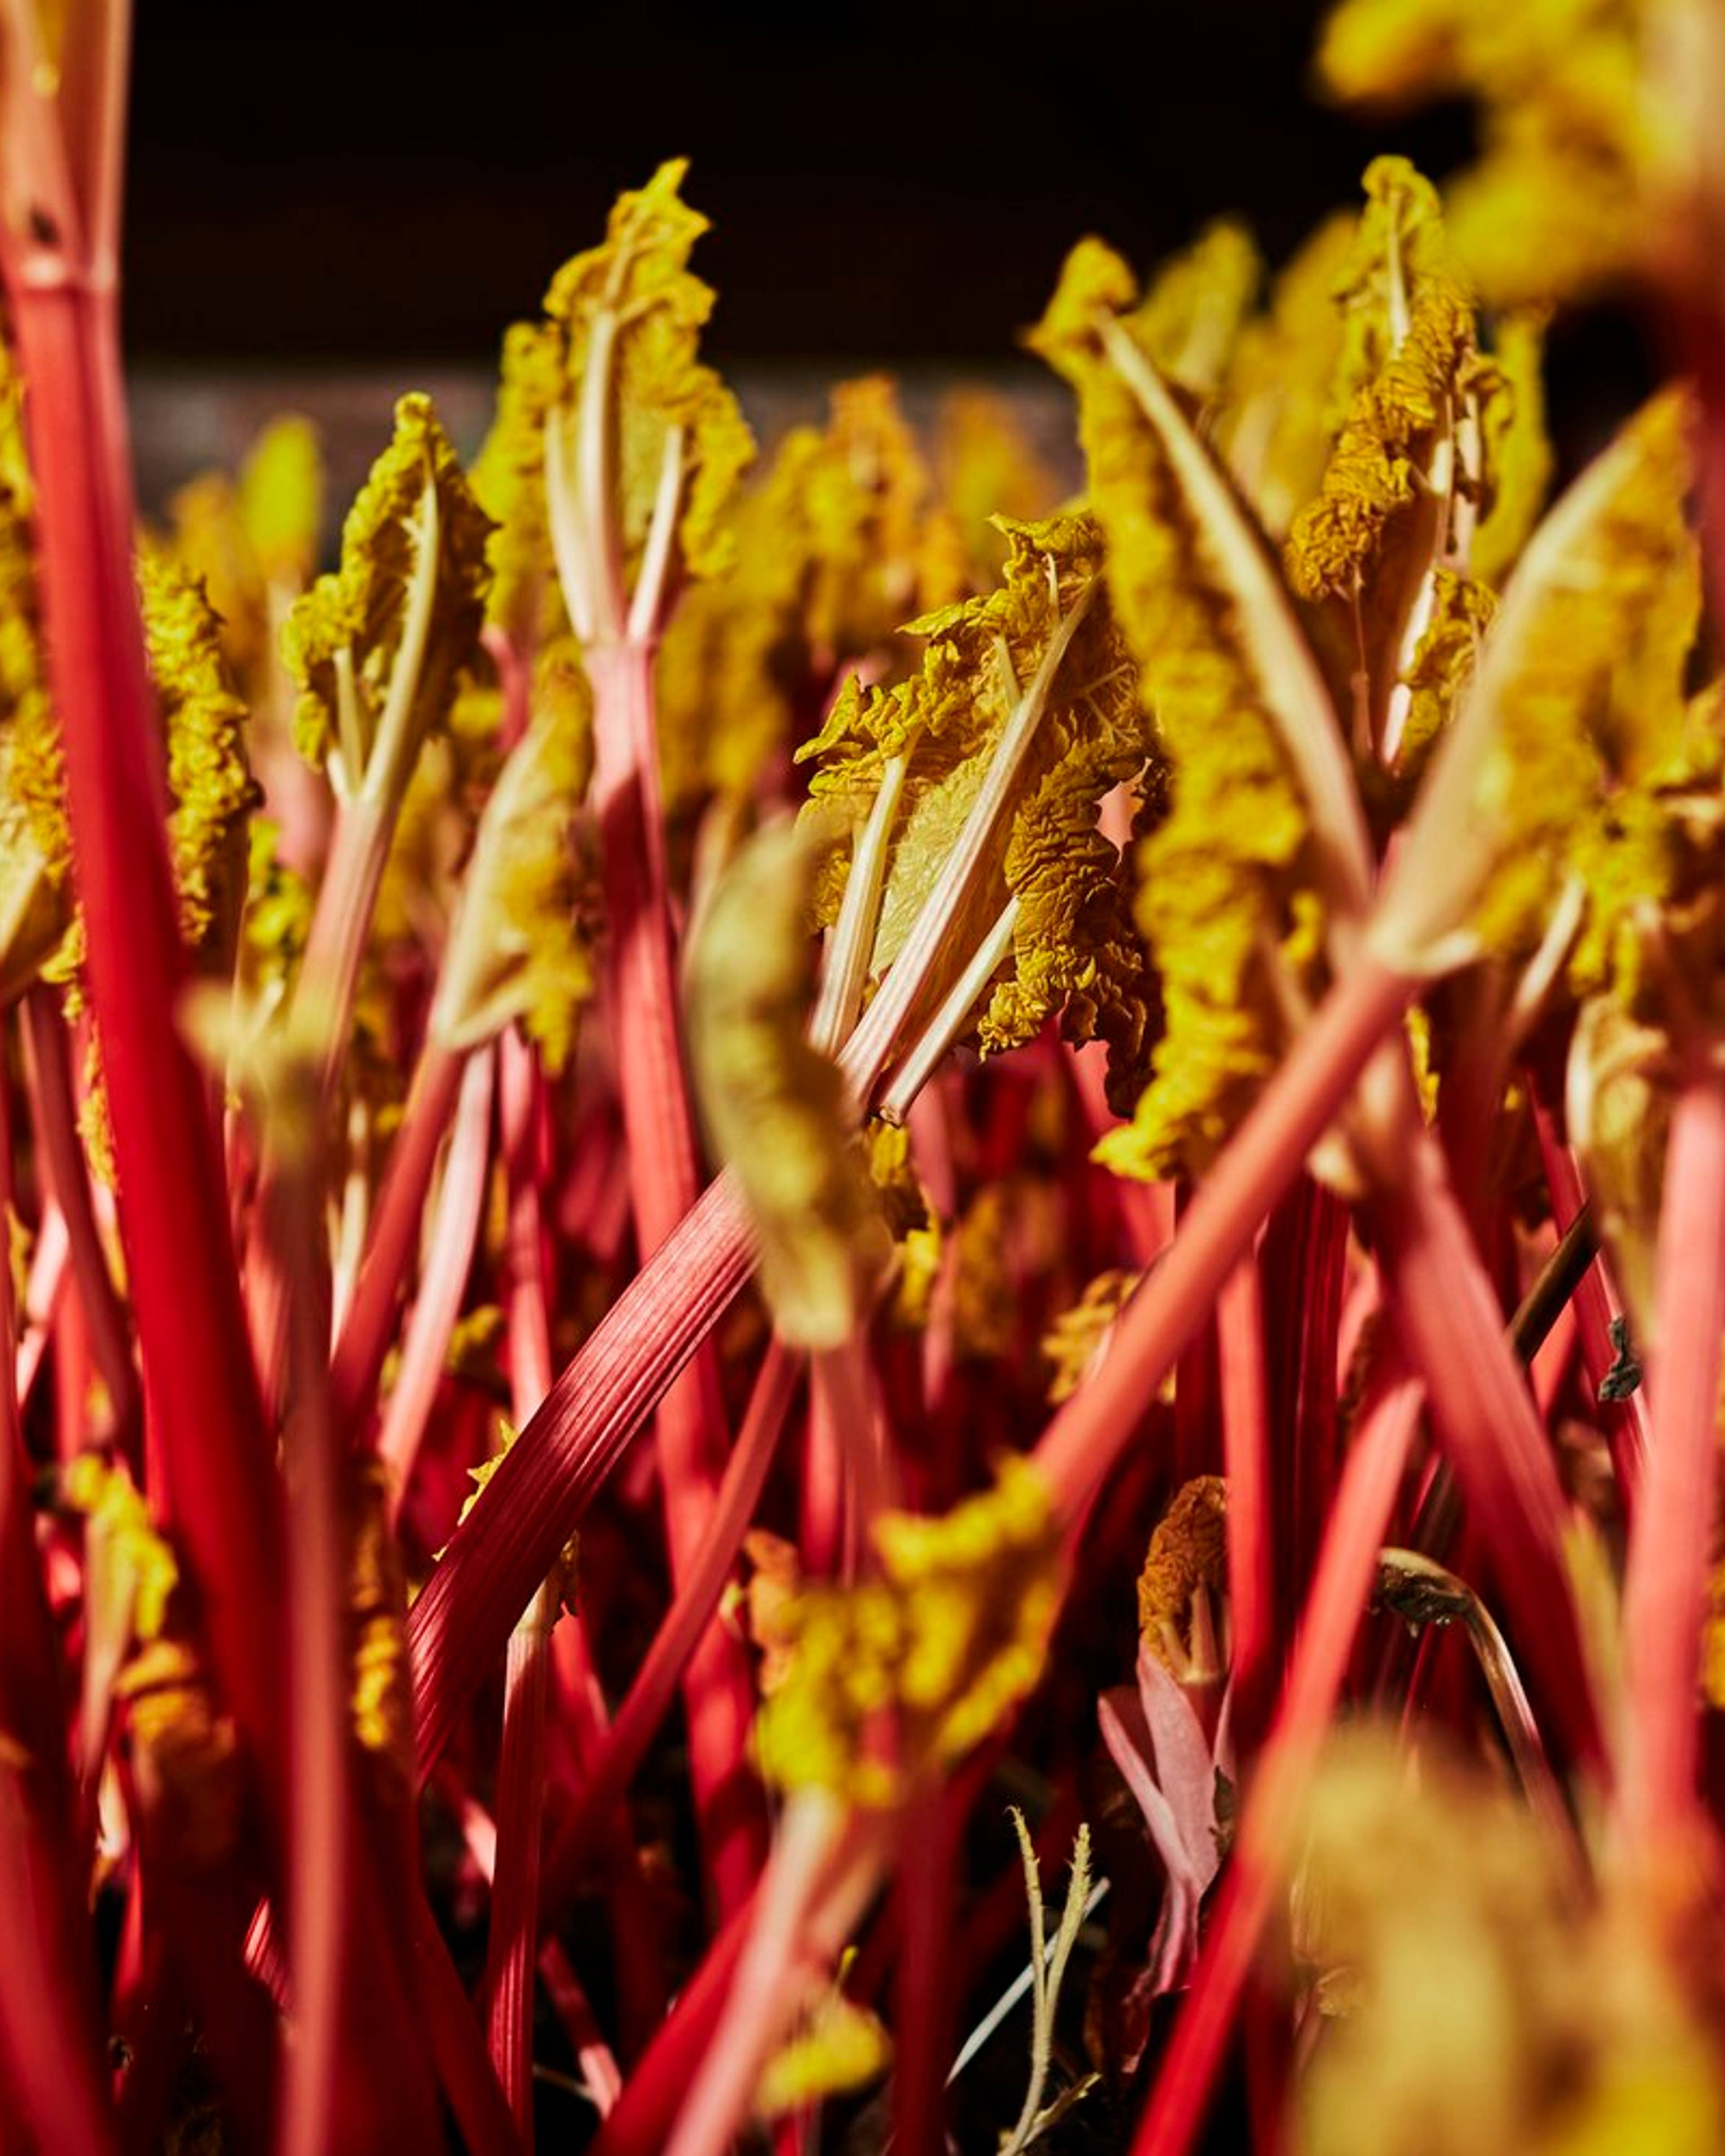 Yorkshire forced rhubarb growing in the forcing shed